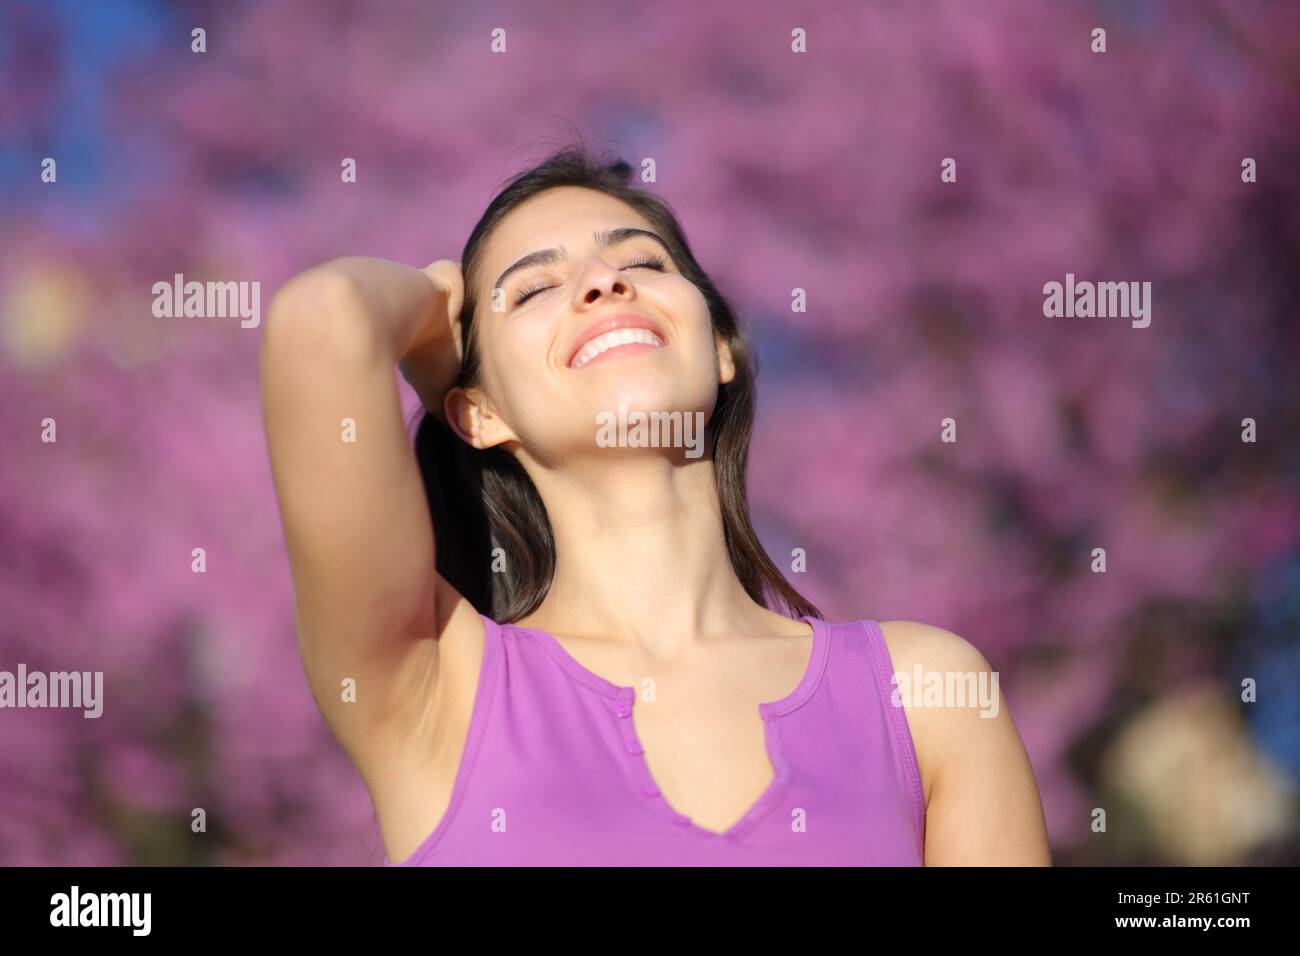 Happy woman smiling and touching hair in a violet park Stock Photo